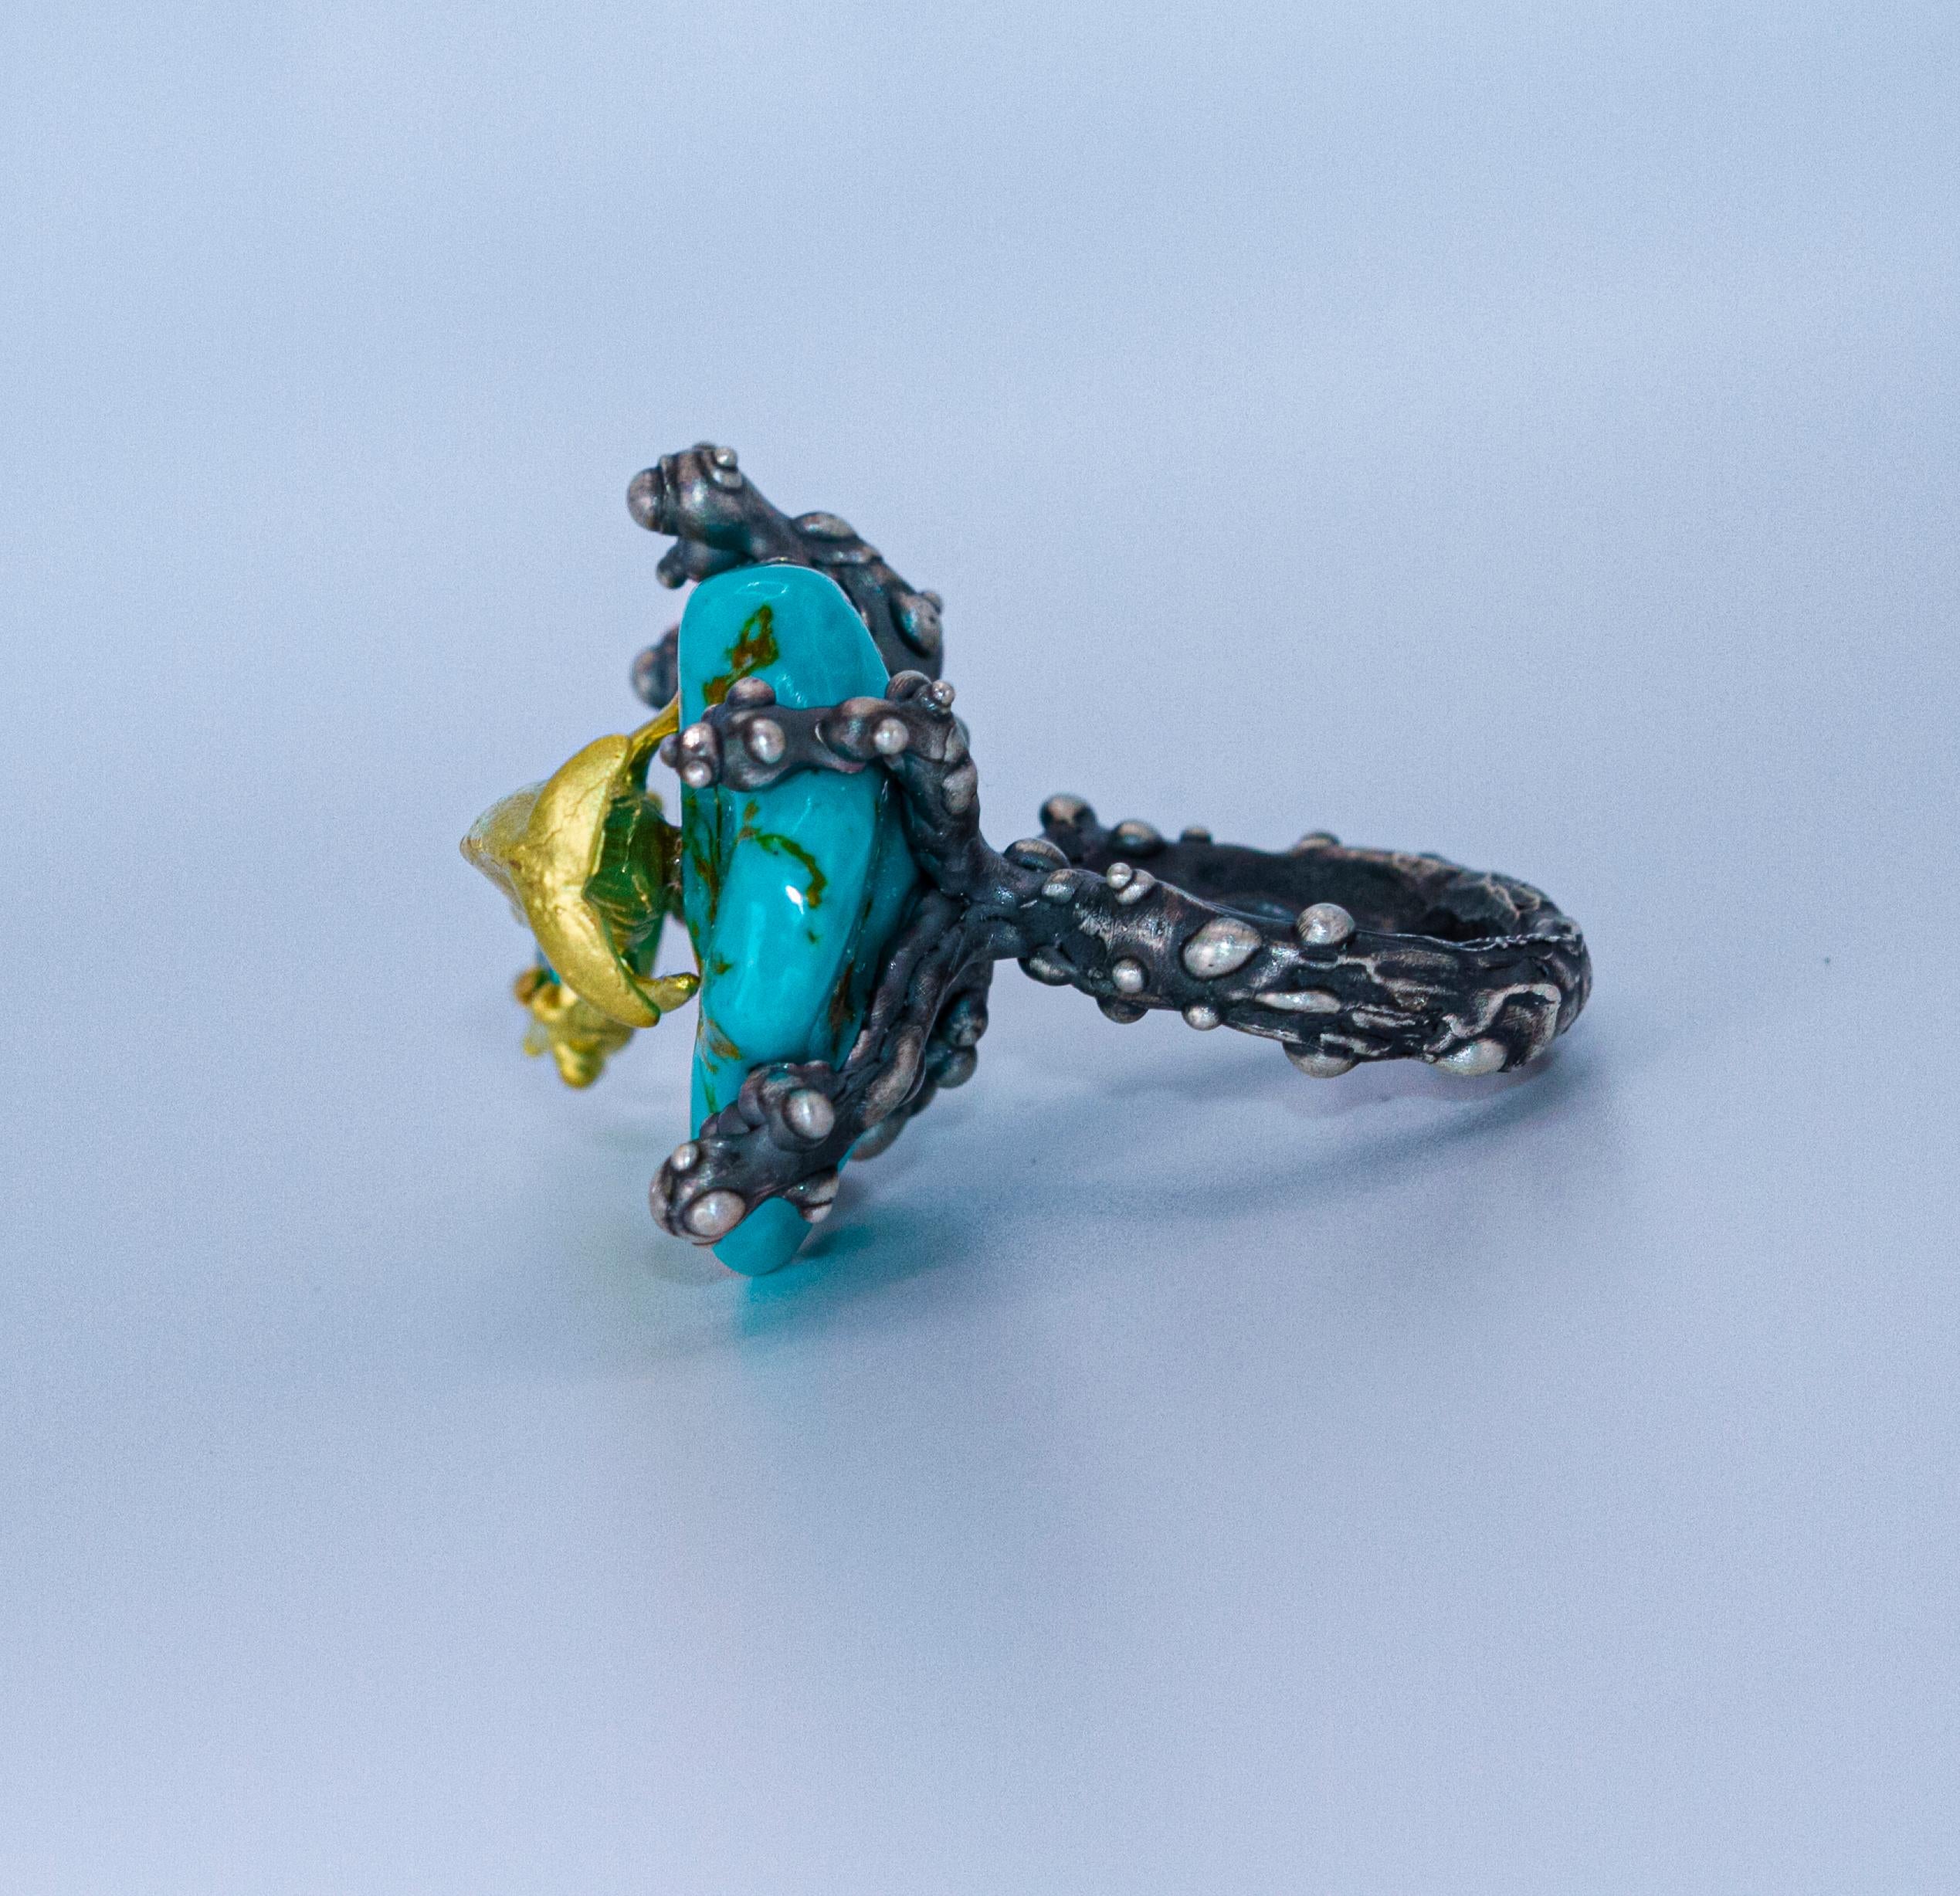 this ring is a one of a kind contemporary jewellery.

This ring is imagined and sculpted by hand by the French jeweller artist Binliang Alexander Peng.
This creation features a 2.5 carat Afghan tourmaline and a raw piece of polished turquoise.
The